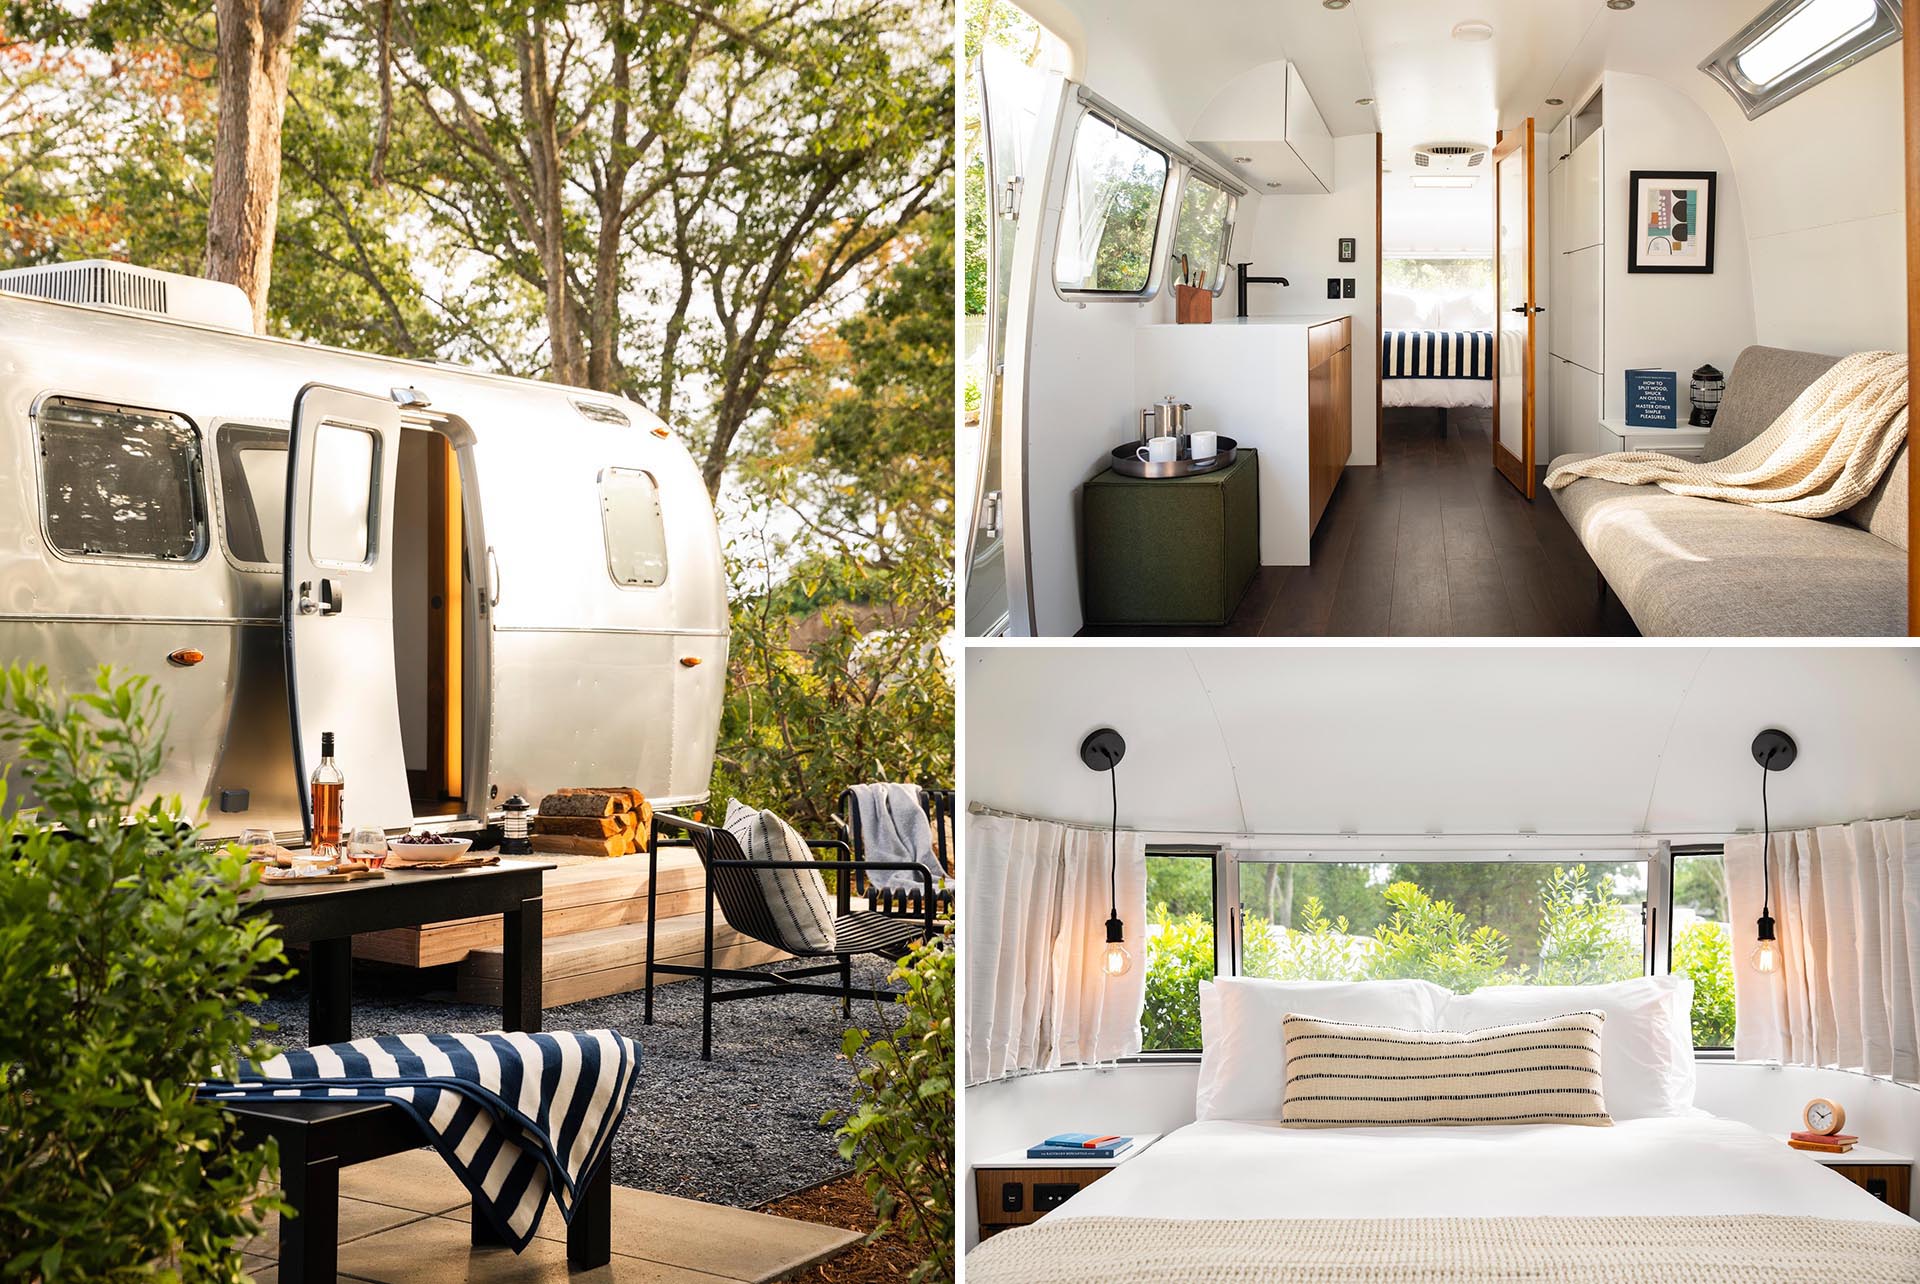 A remodeled Airstream trailer with a modern interior that includes a living room, kitchenette, bathroom, and bedroom.